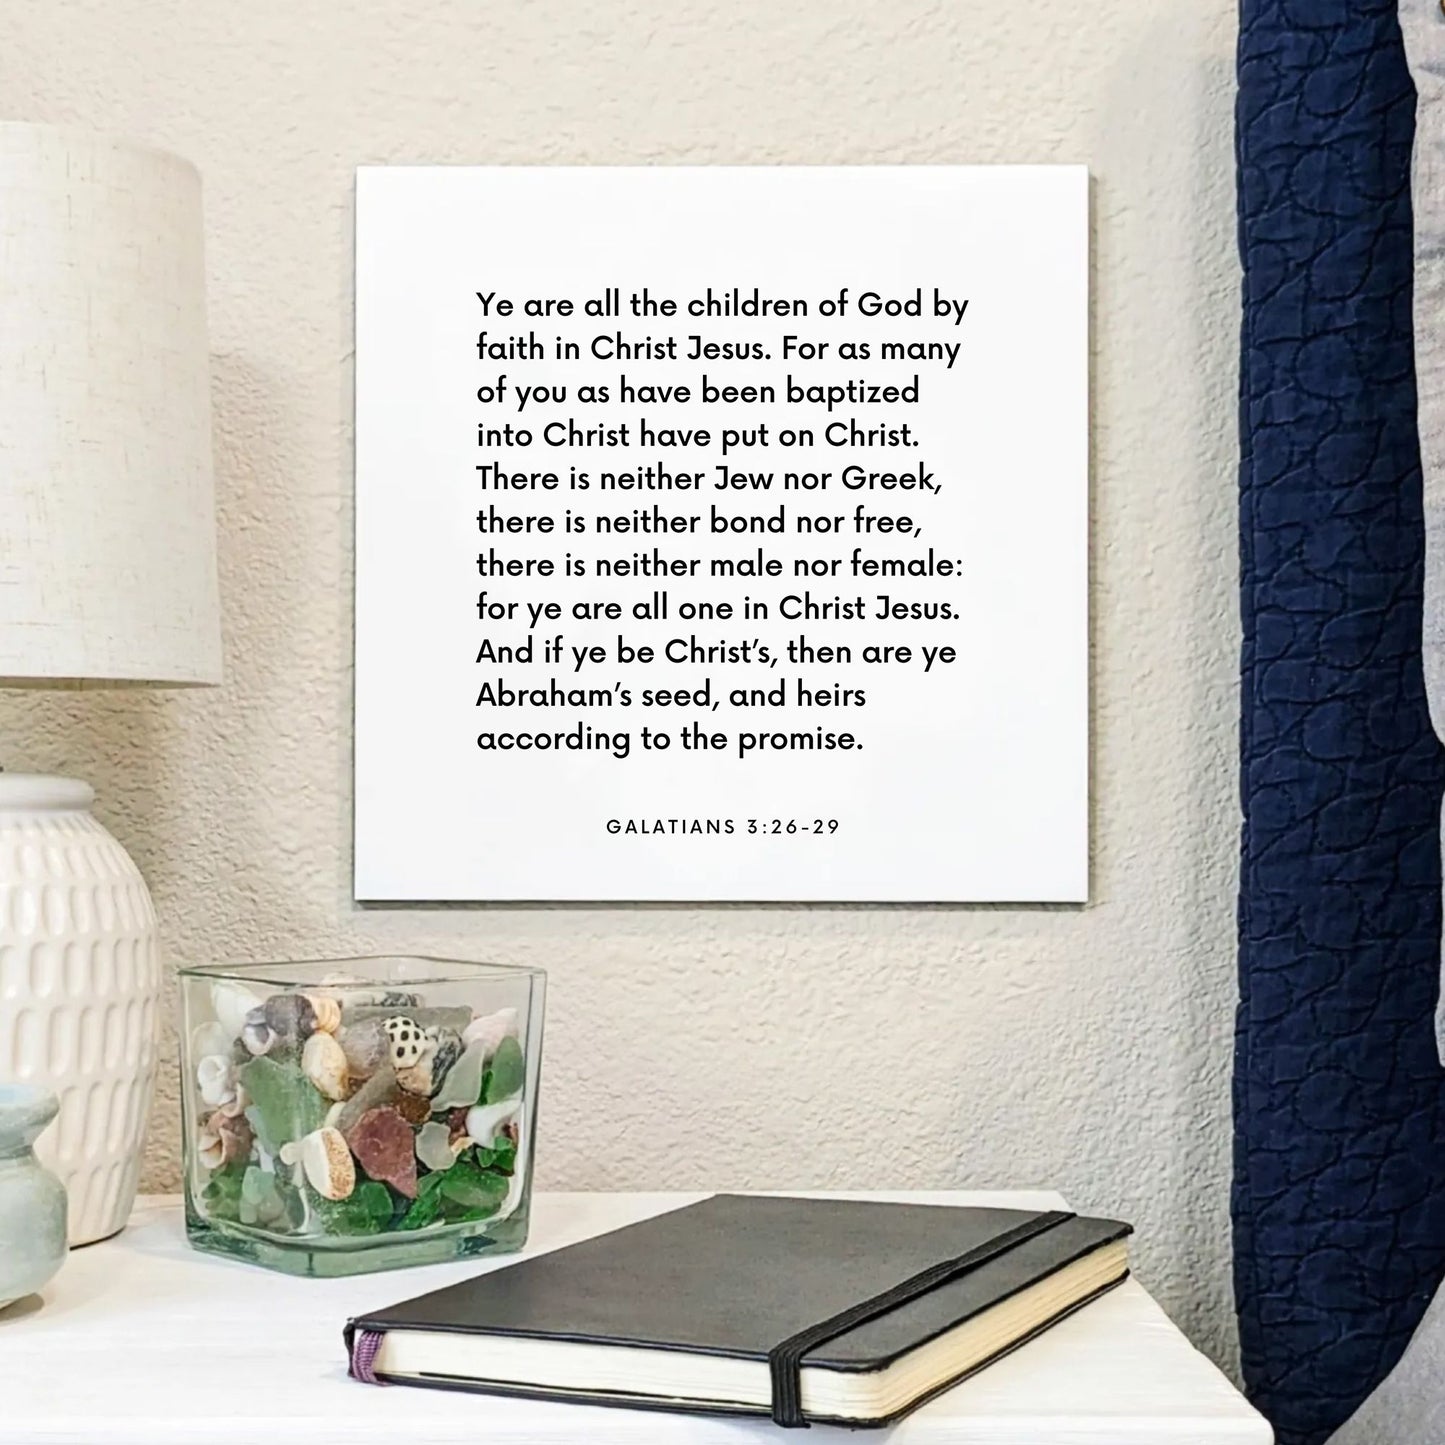 Bedside mouting of the scripture tile for Galatians 3:26-29 - "Ye are all one in Christ Jesus"